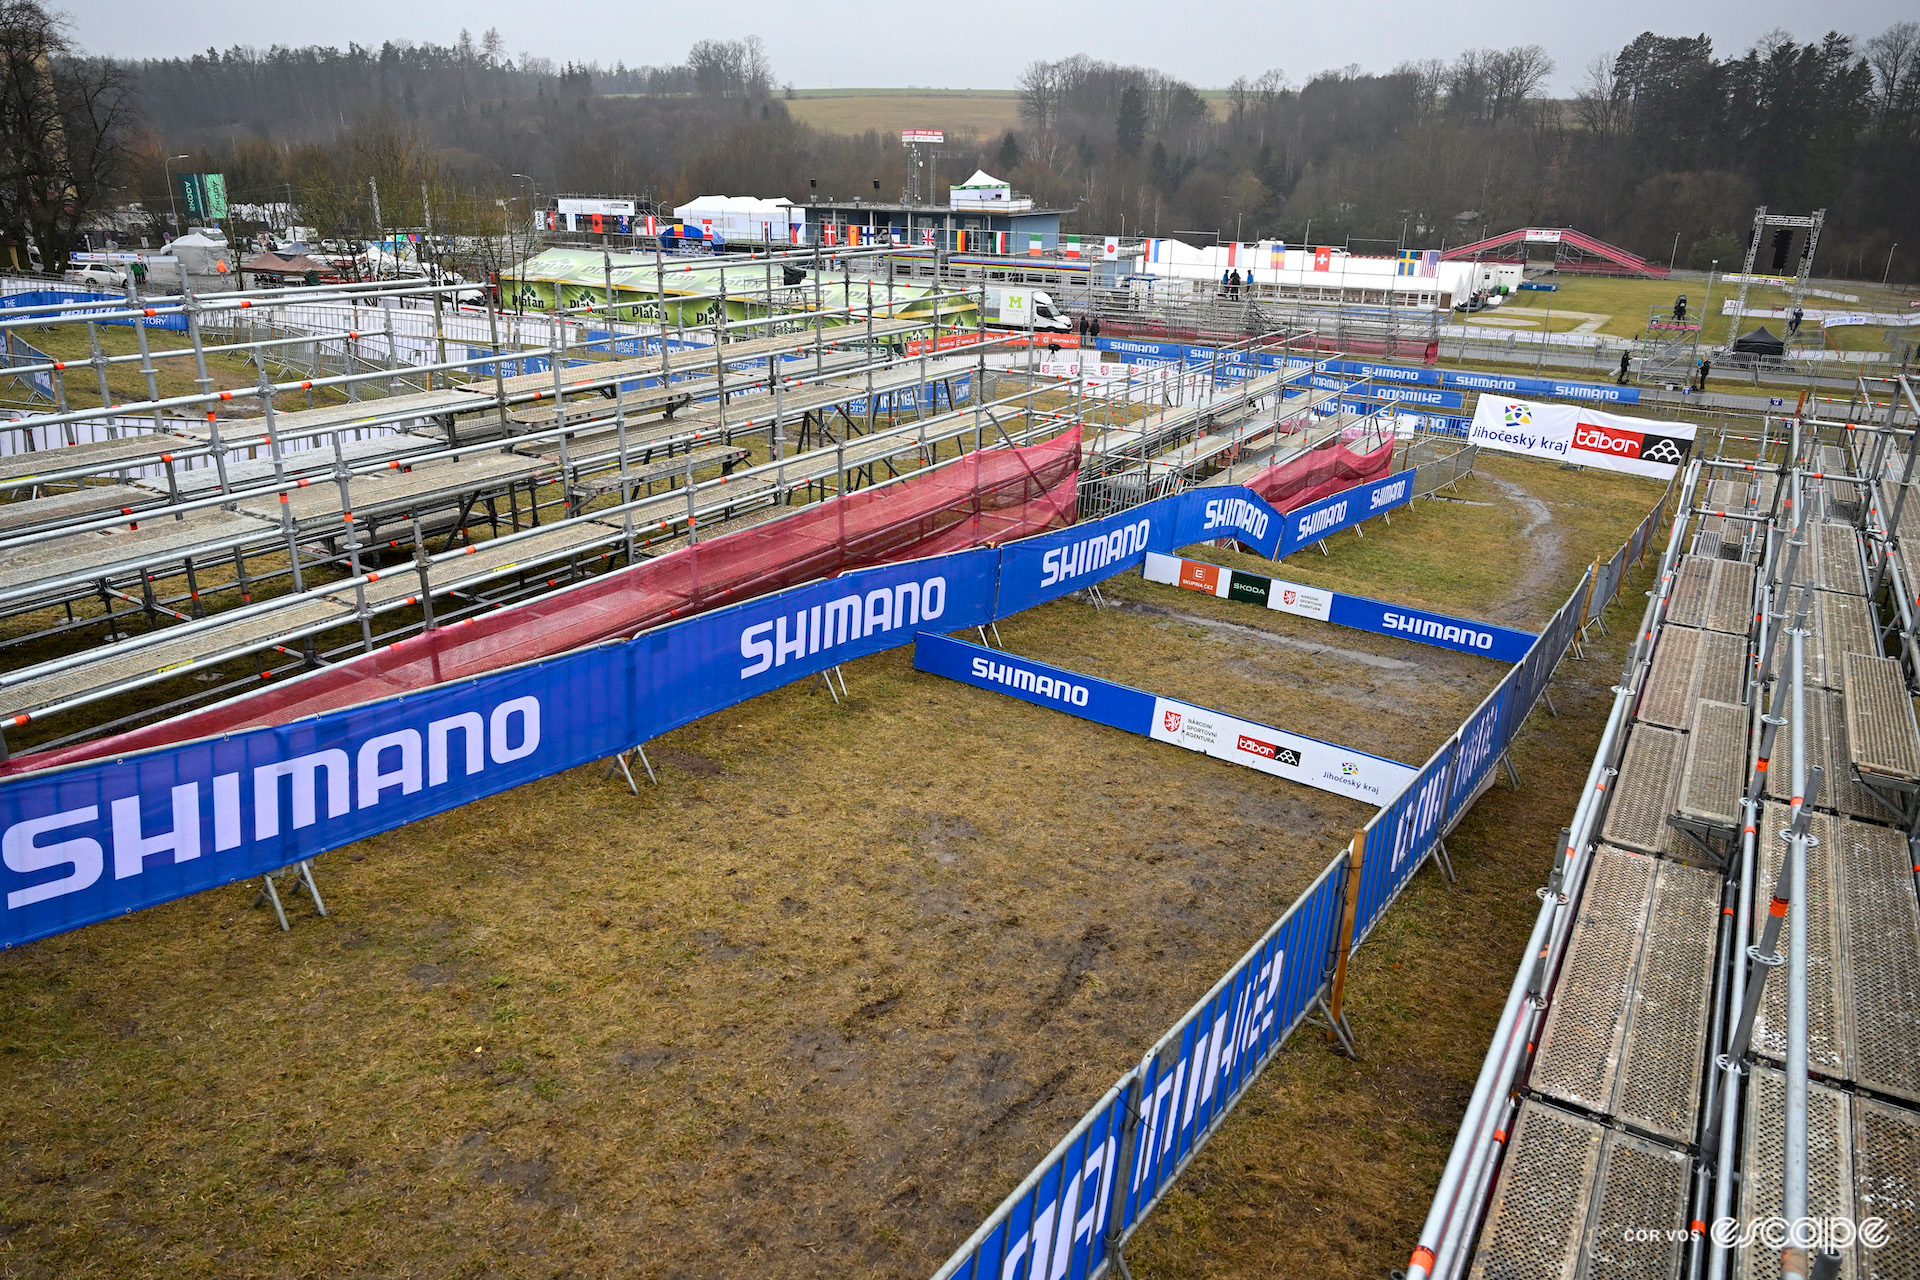 A pre-event photo showing the planks flanked by spectator stands, one of the key features of the Tábor course for the 2024 Cyclocross World Championships.